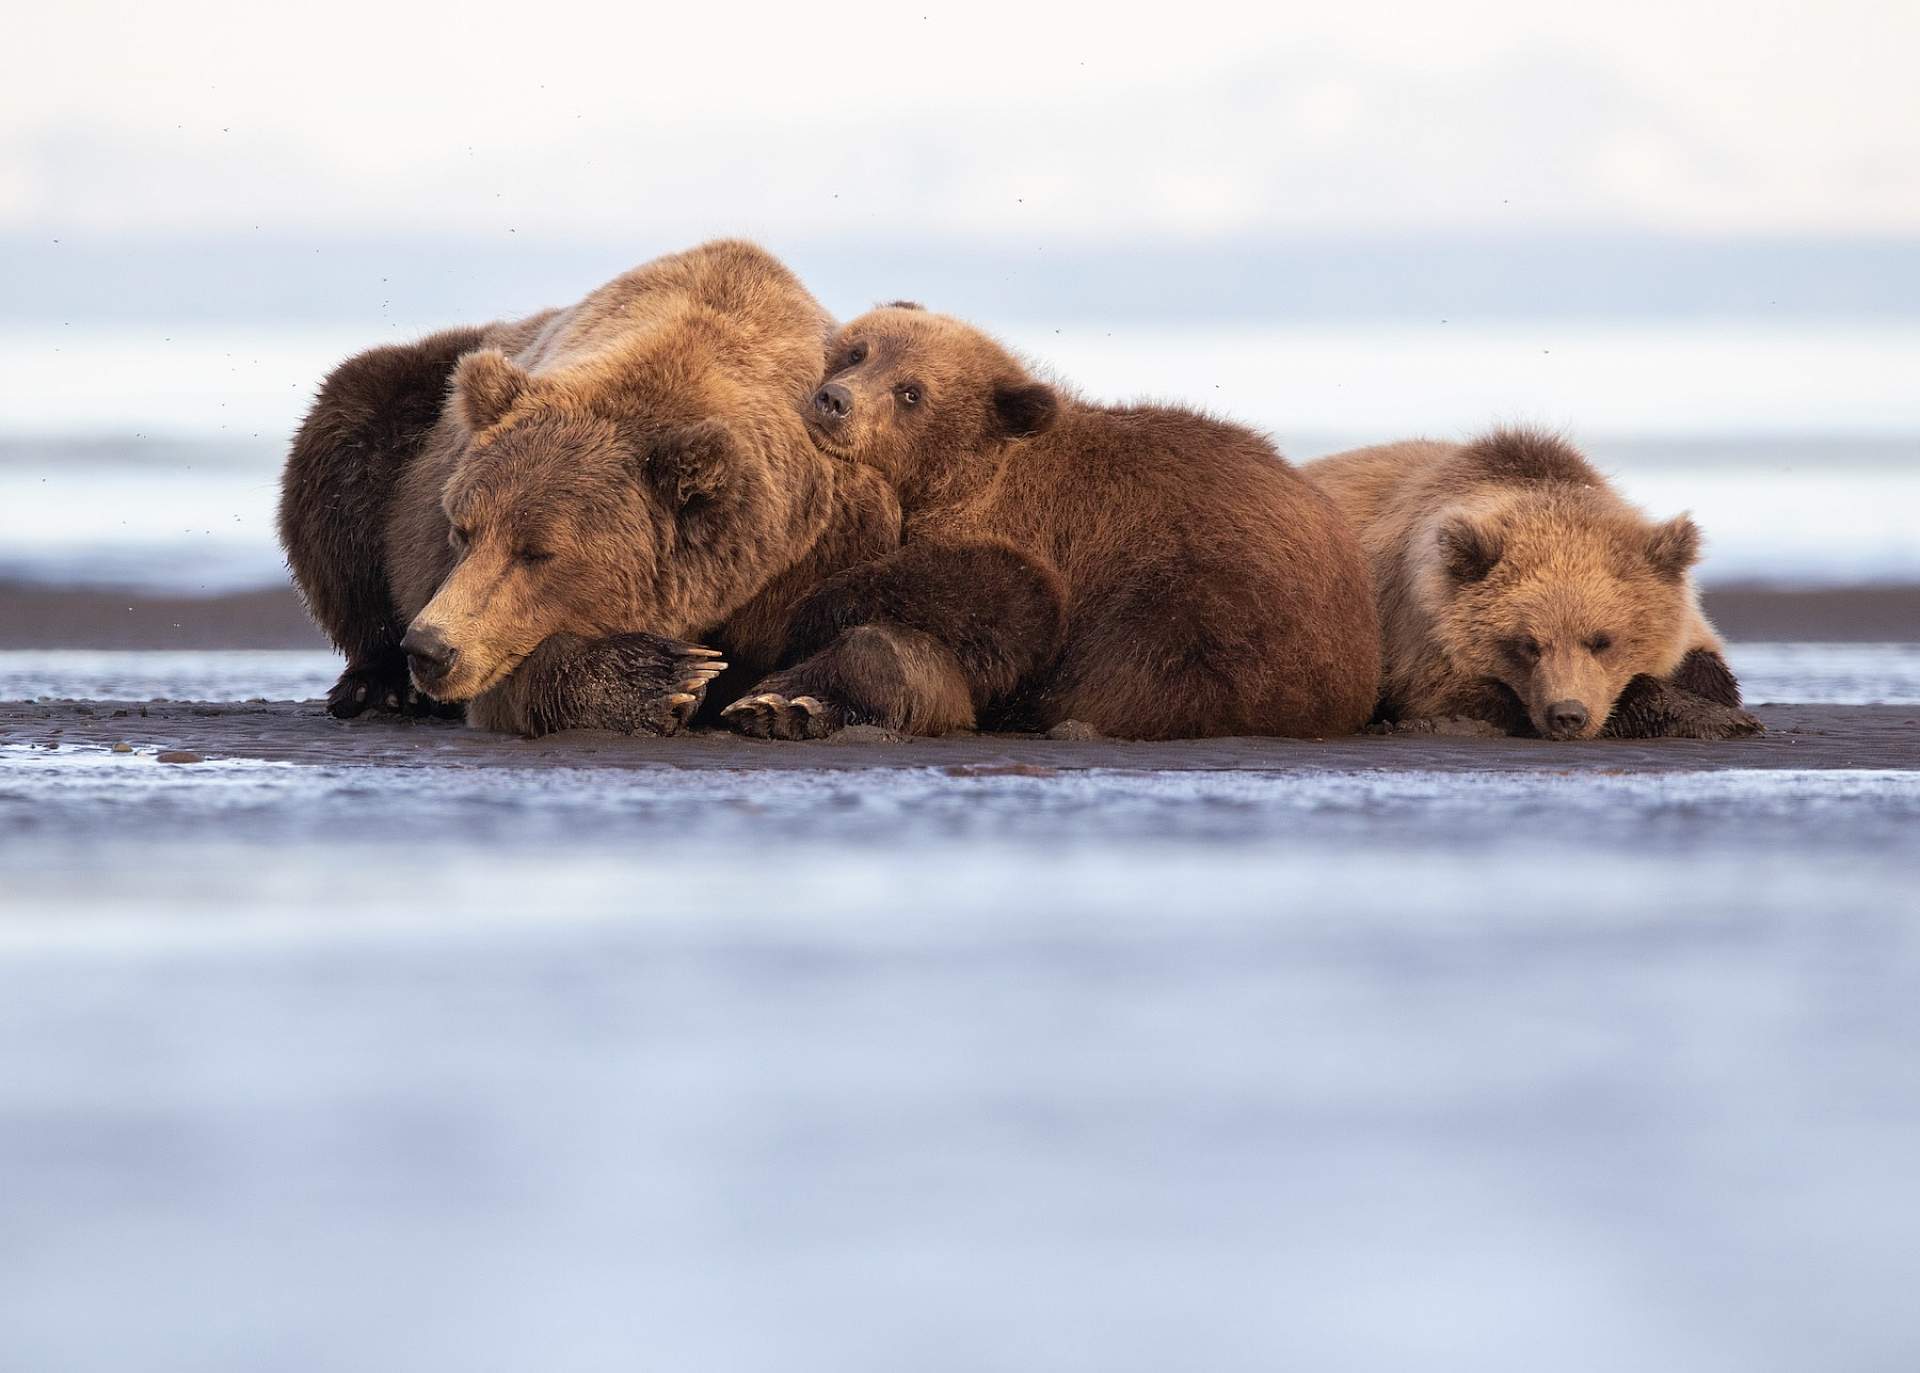 A mother bear and her two cubs relax on the beach while they wait for the salmon to run